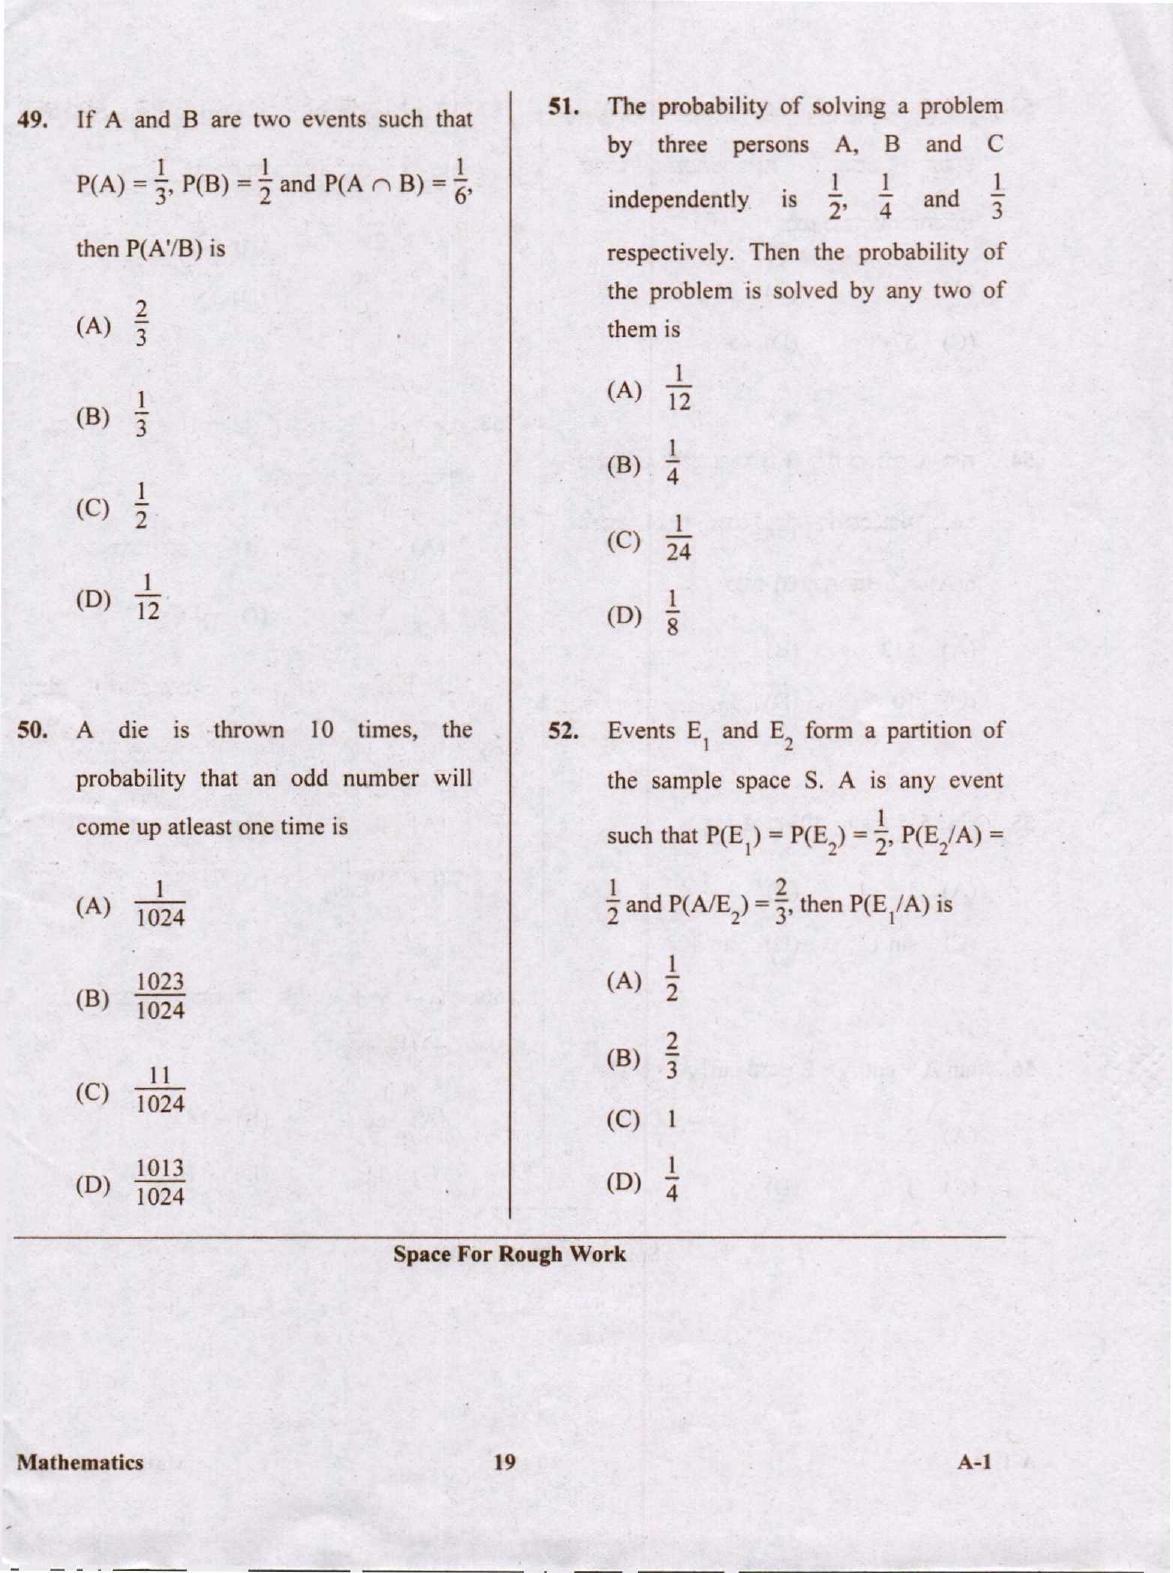 KCET Mathematics 2020 Question Papers - Page 19